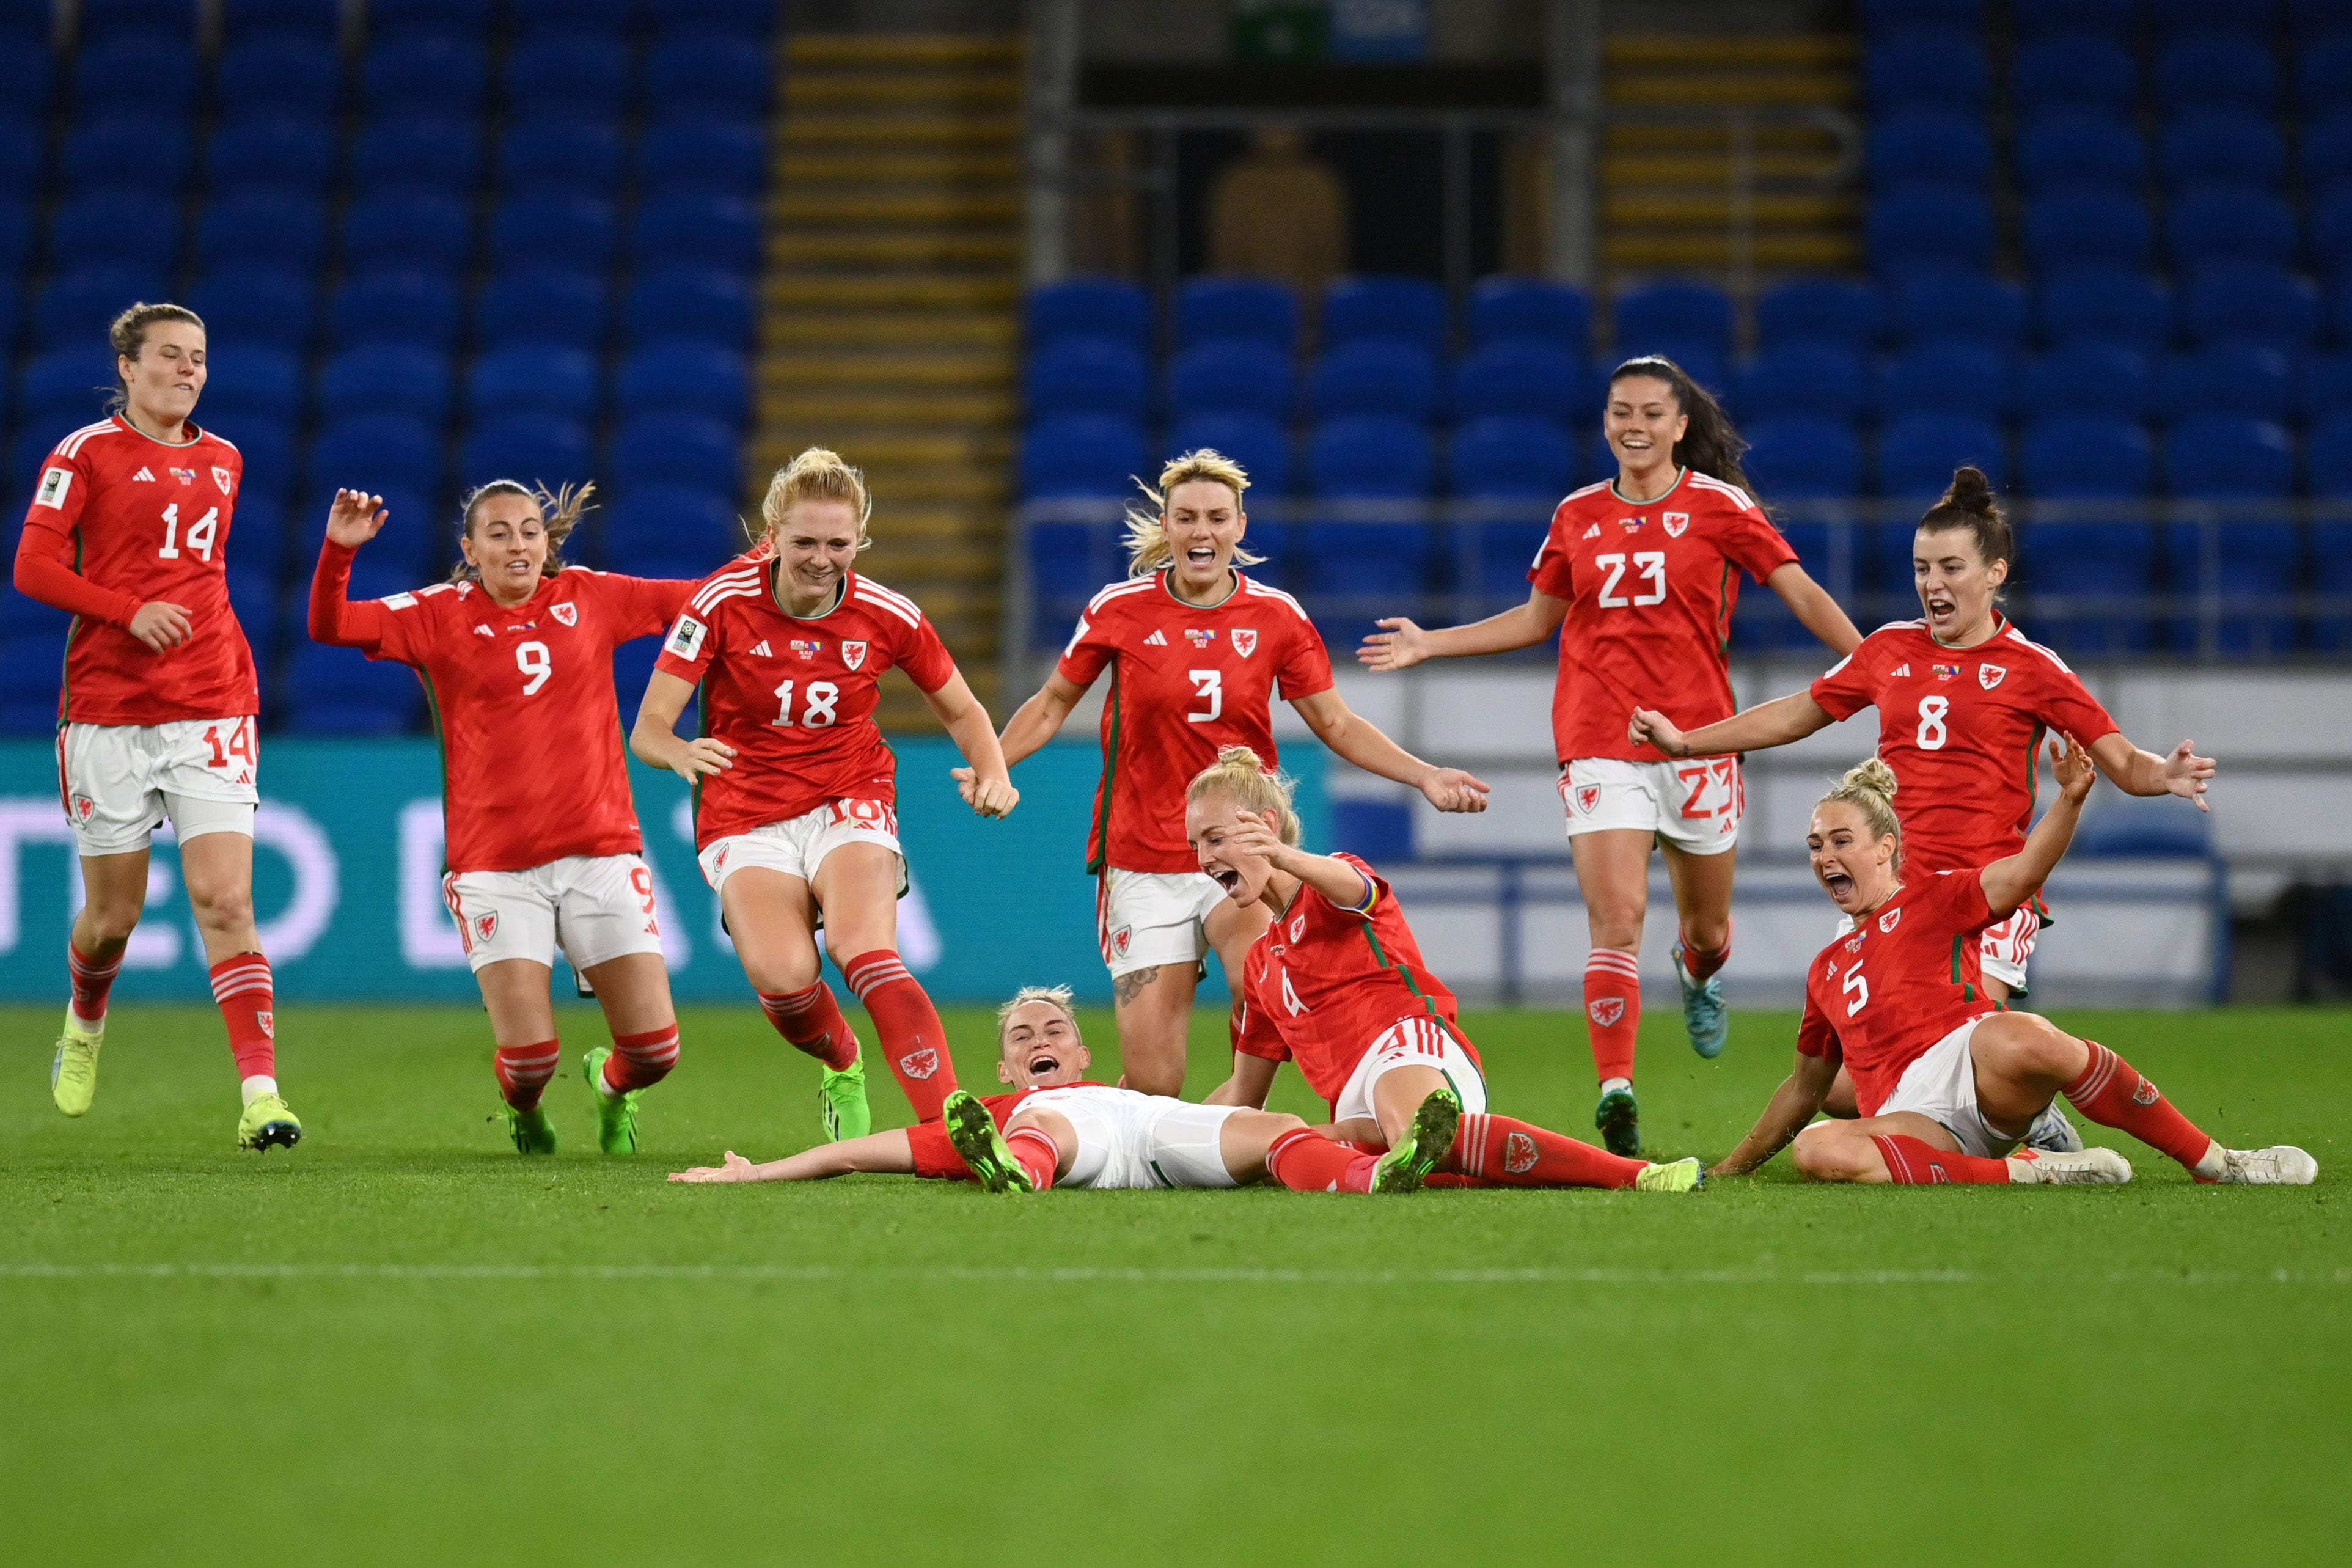 Wales players celebrate a goal during World Cup qualifying